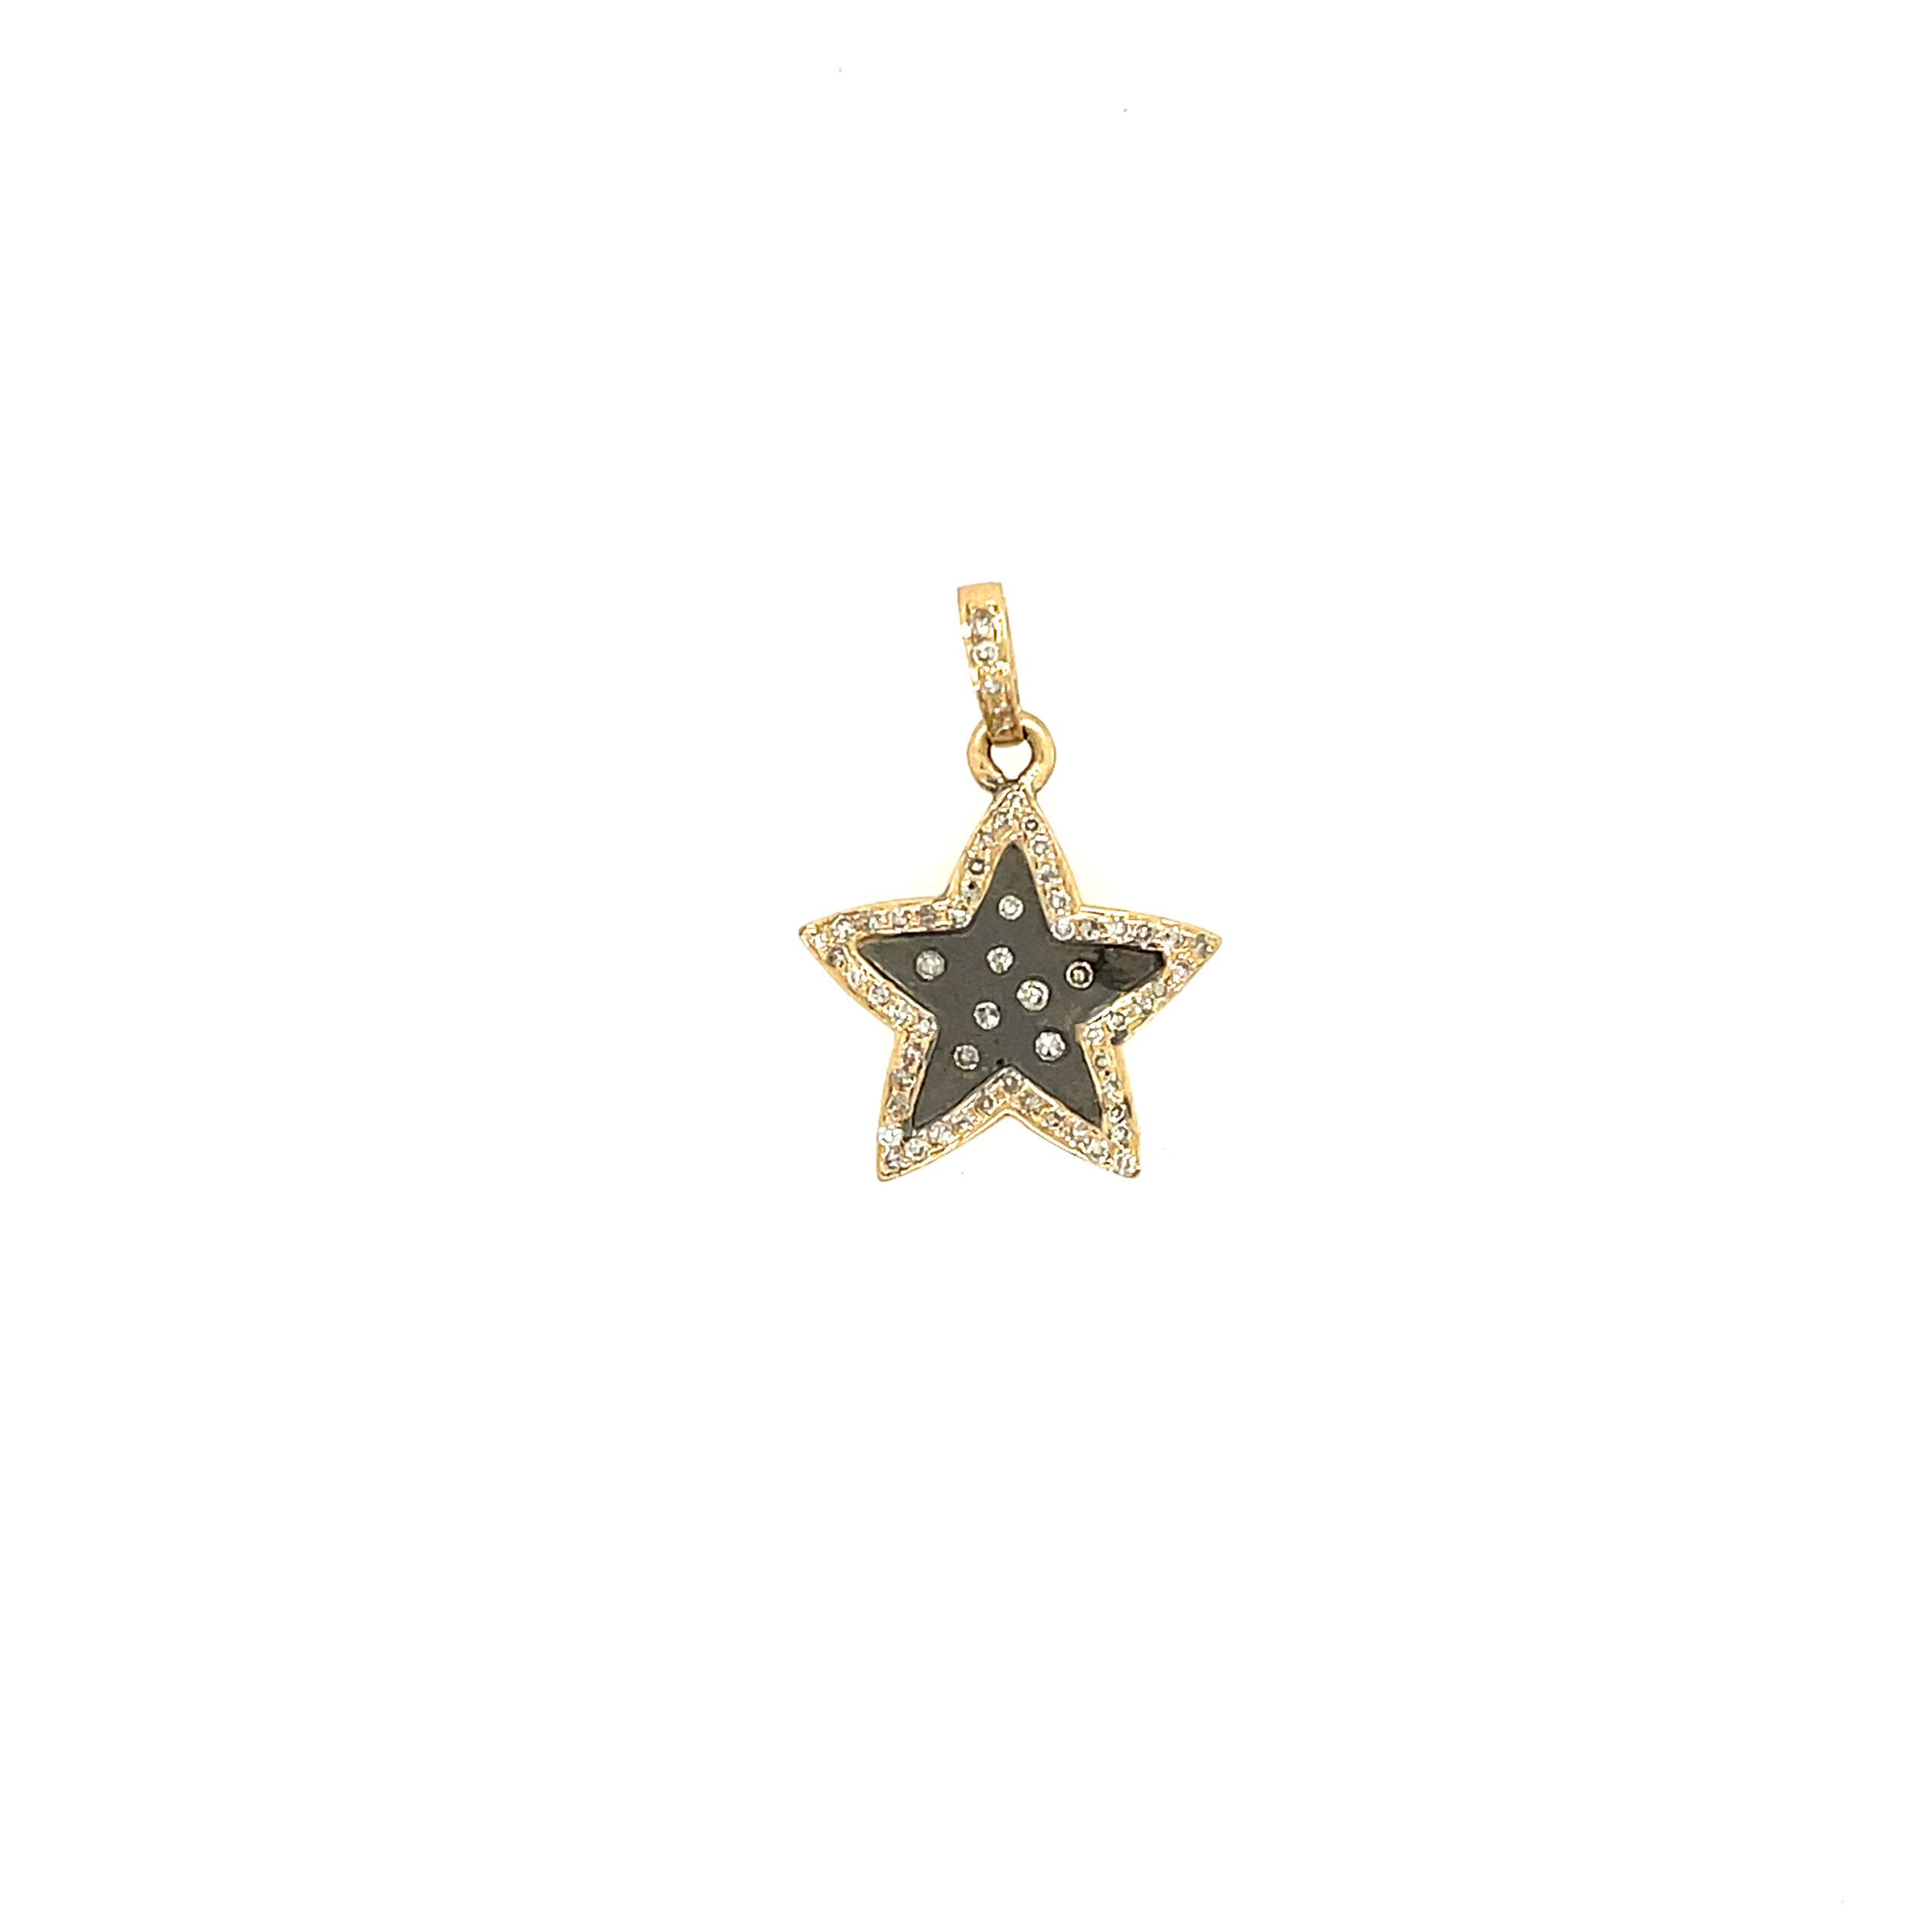 Featured image for “2 Tone Mini Star”